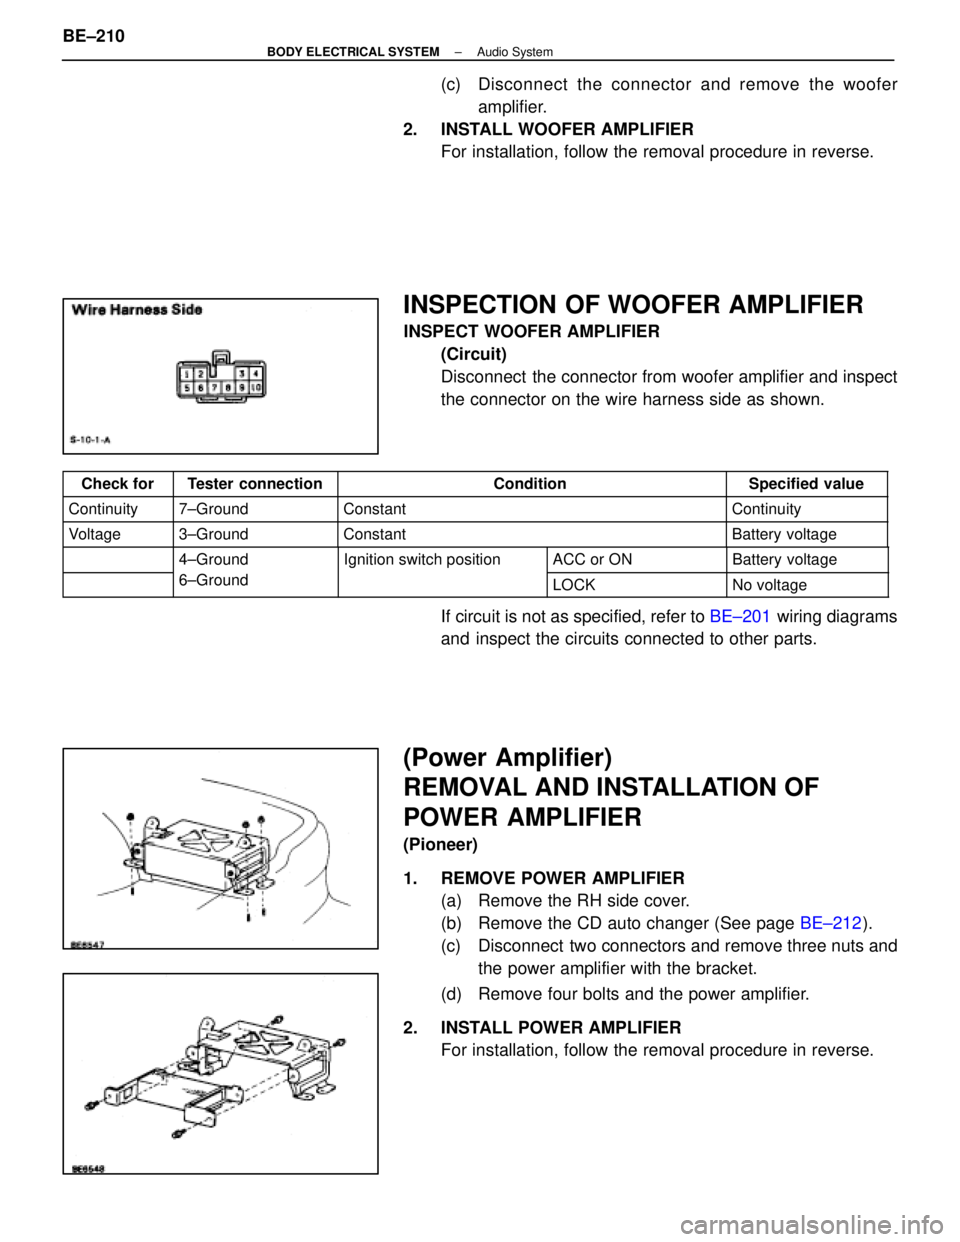 LEXUS SC300 1991  Service Repair Manual 
(c)  Disconnect the connector and remove the wooferamplifier.
2.  INSTALL WOOFER AMPLIFIER For installation, follow the removal procedure in reverse.
INSPECTION OF WOOFER AMPLIFIER
INSPECT WOOFER AMP